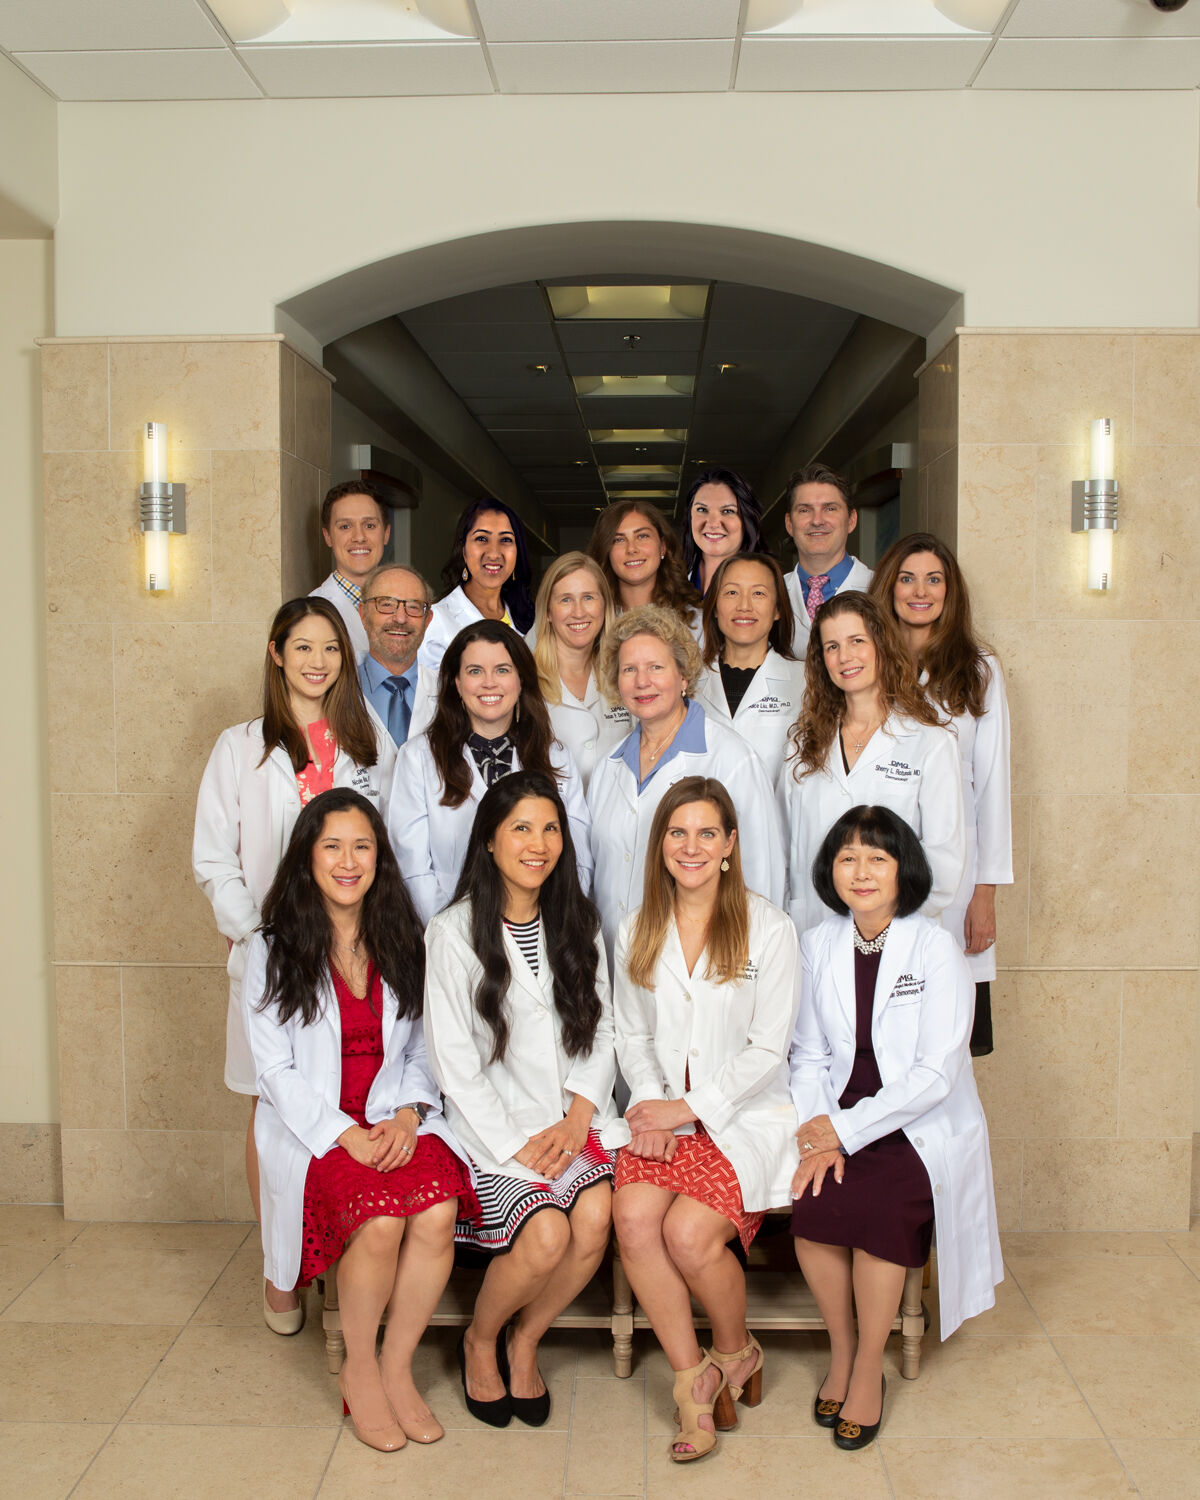 Faces of Health Care 2020 / Dermatoligists Medical Group of North County